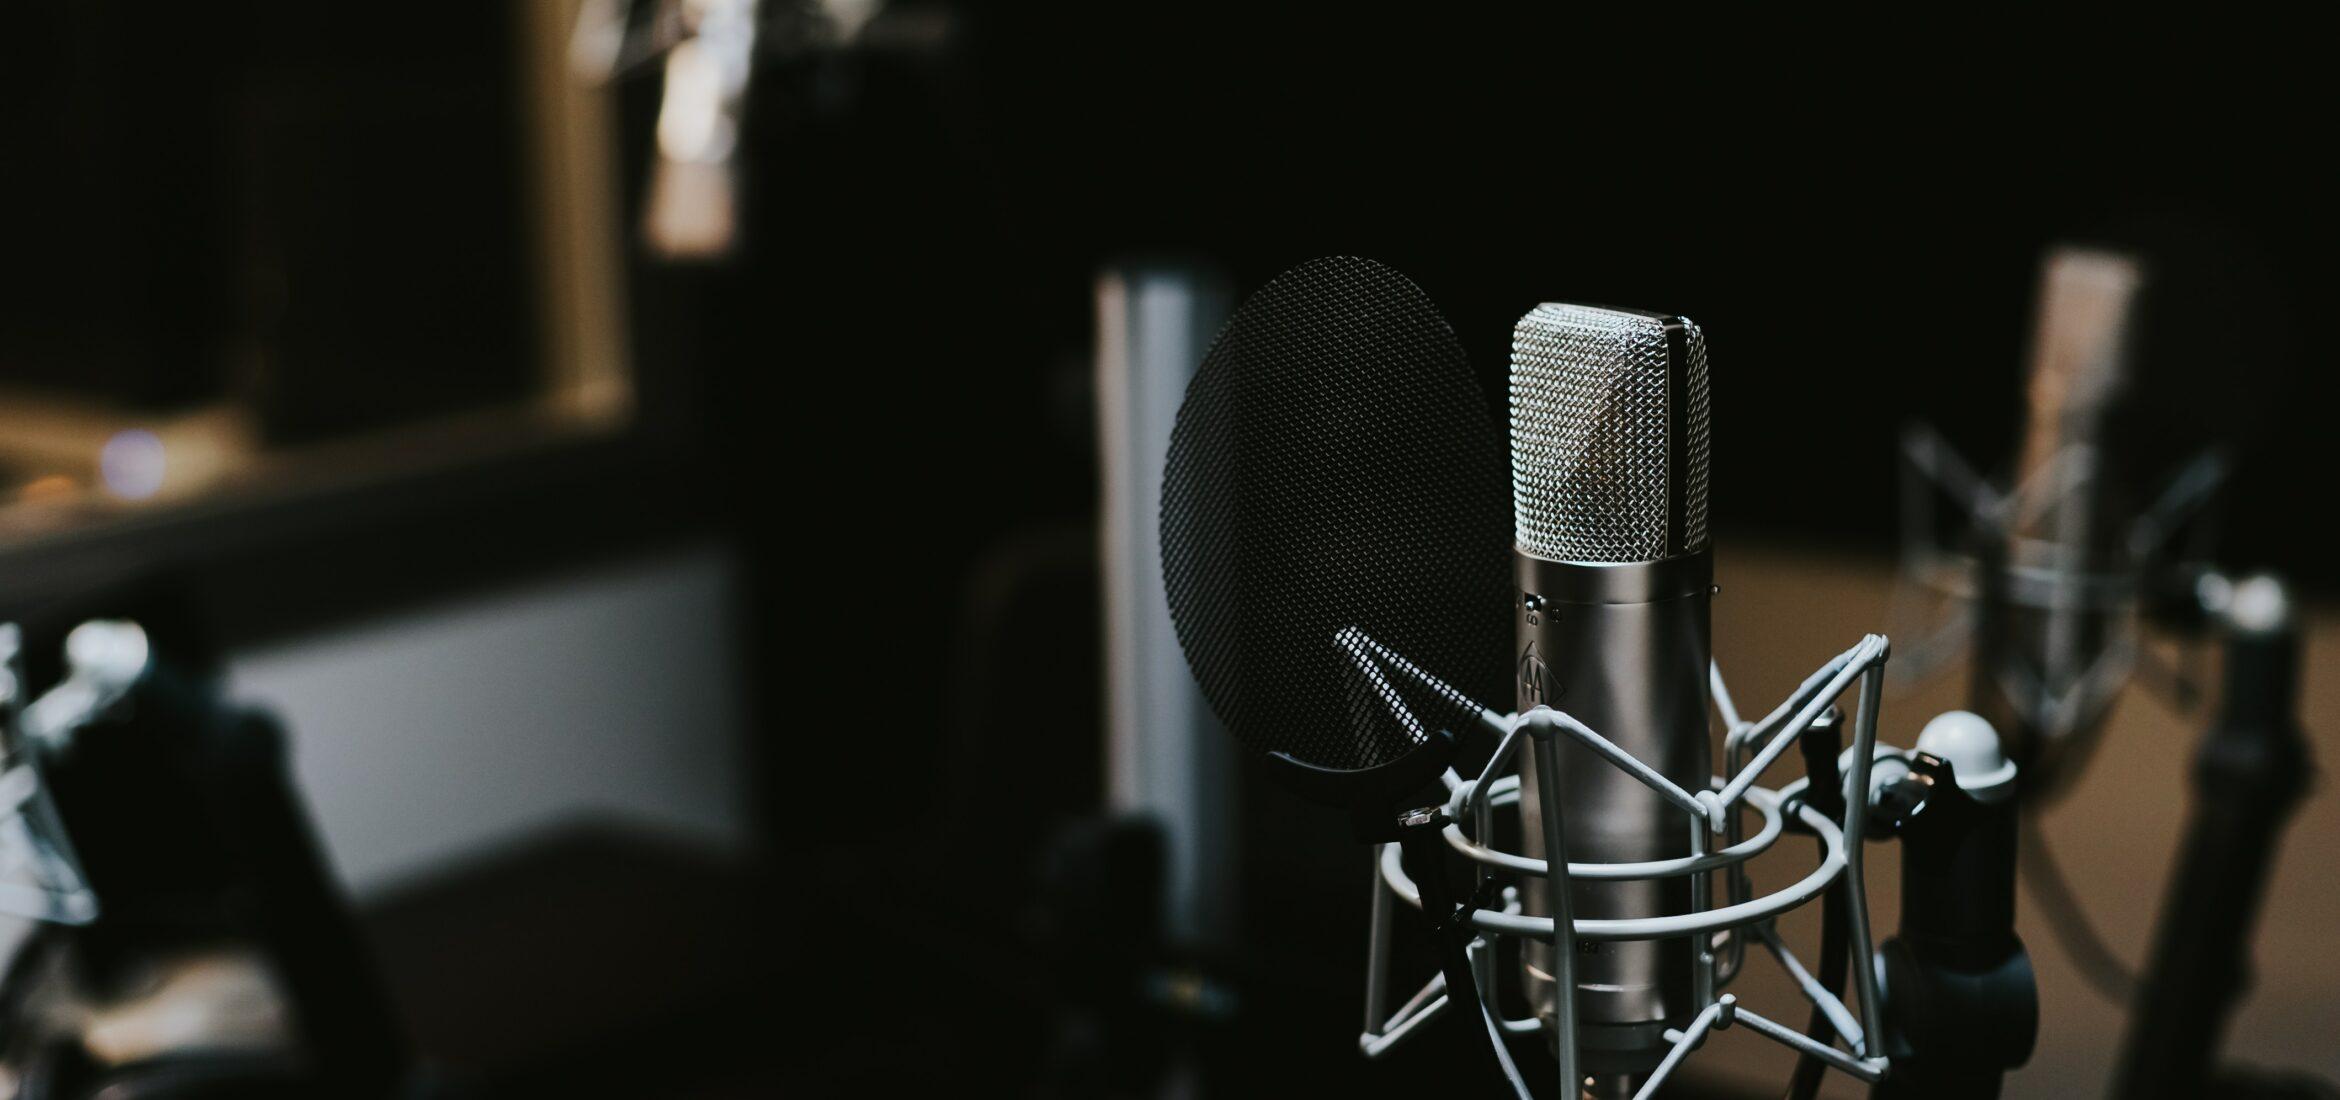 Professionally Record Vocals in 5 Simple Steps